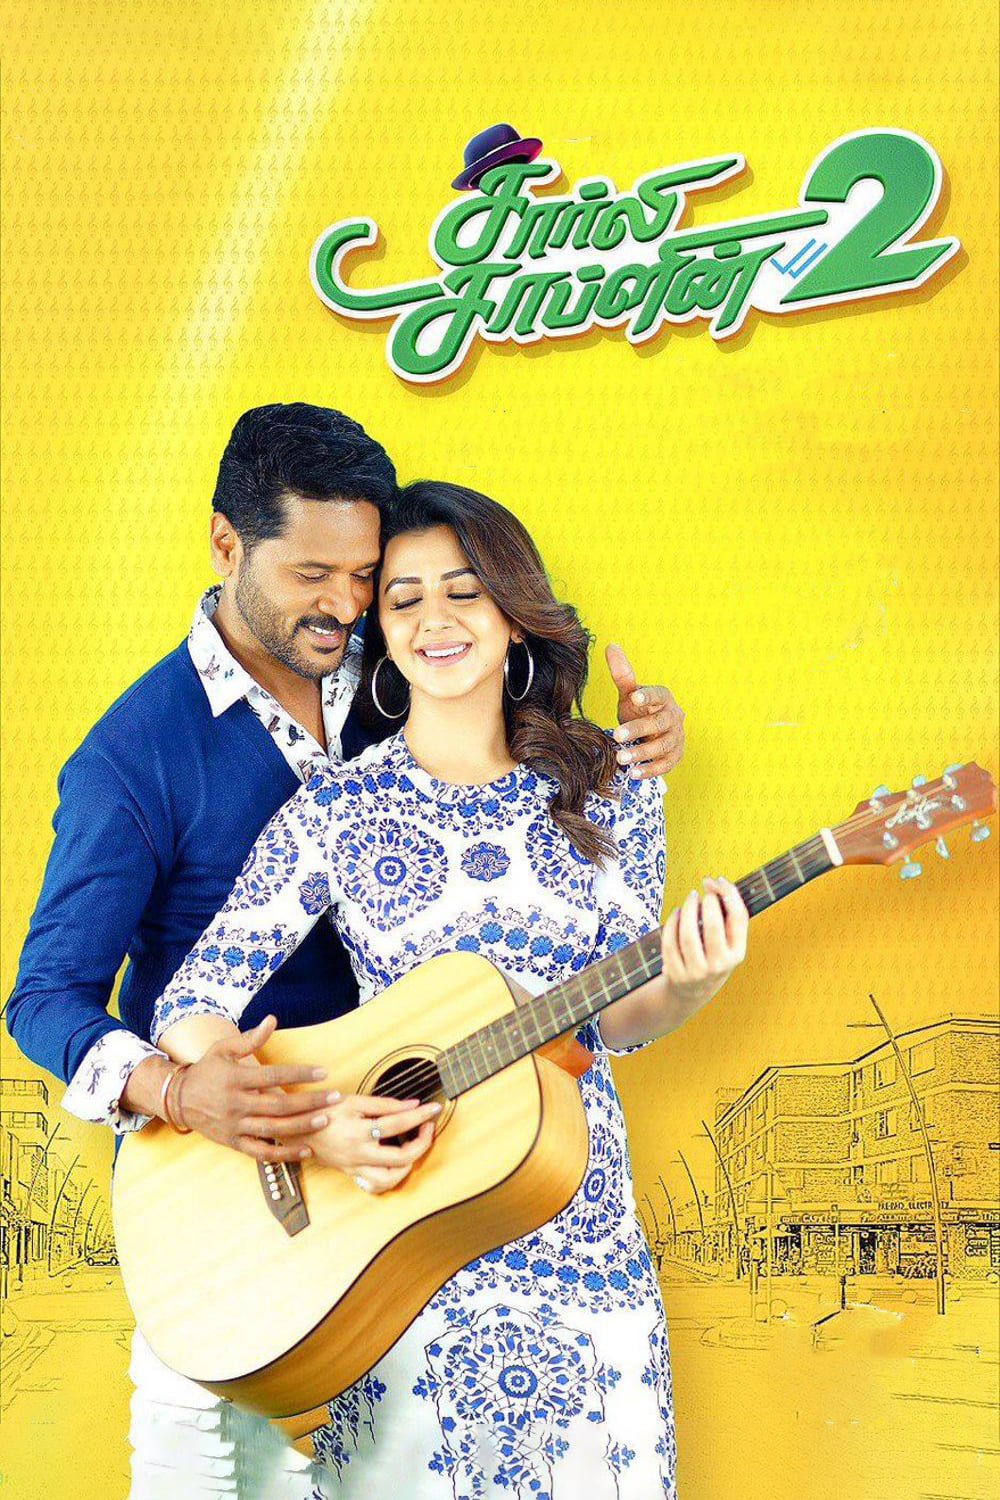 Poster for the movie "Charlie Chaplin 2"